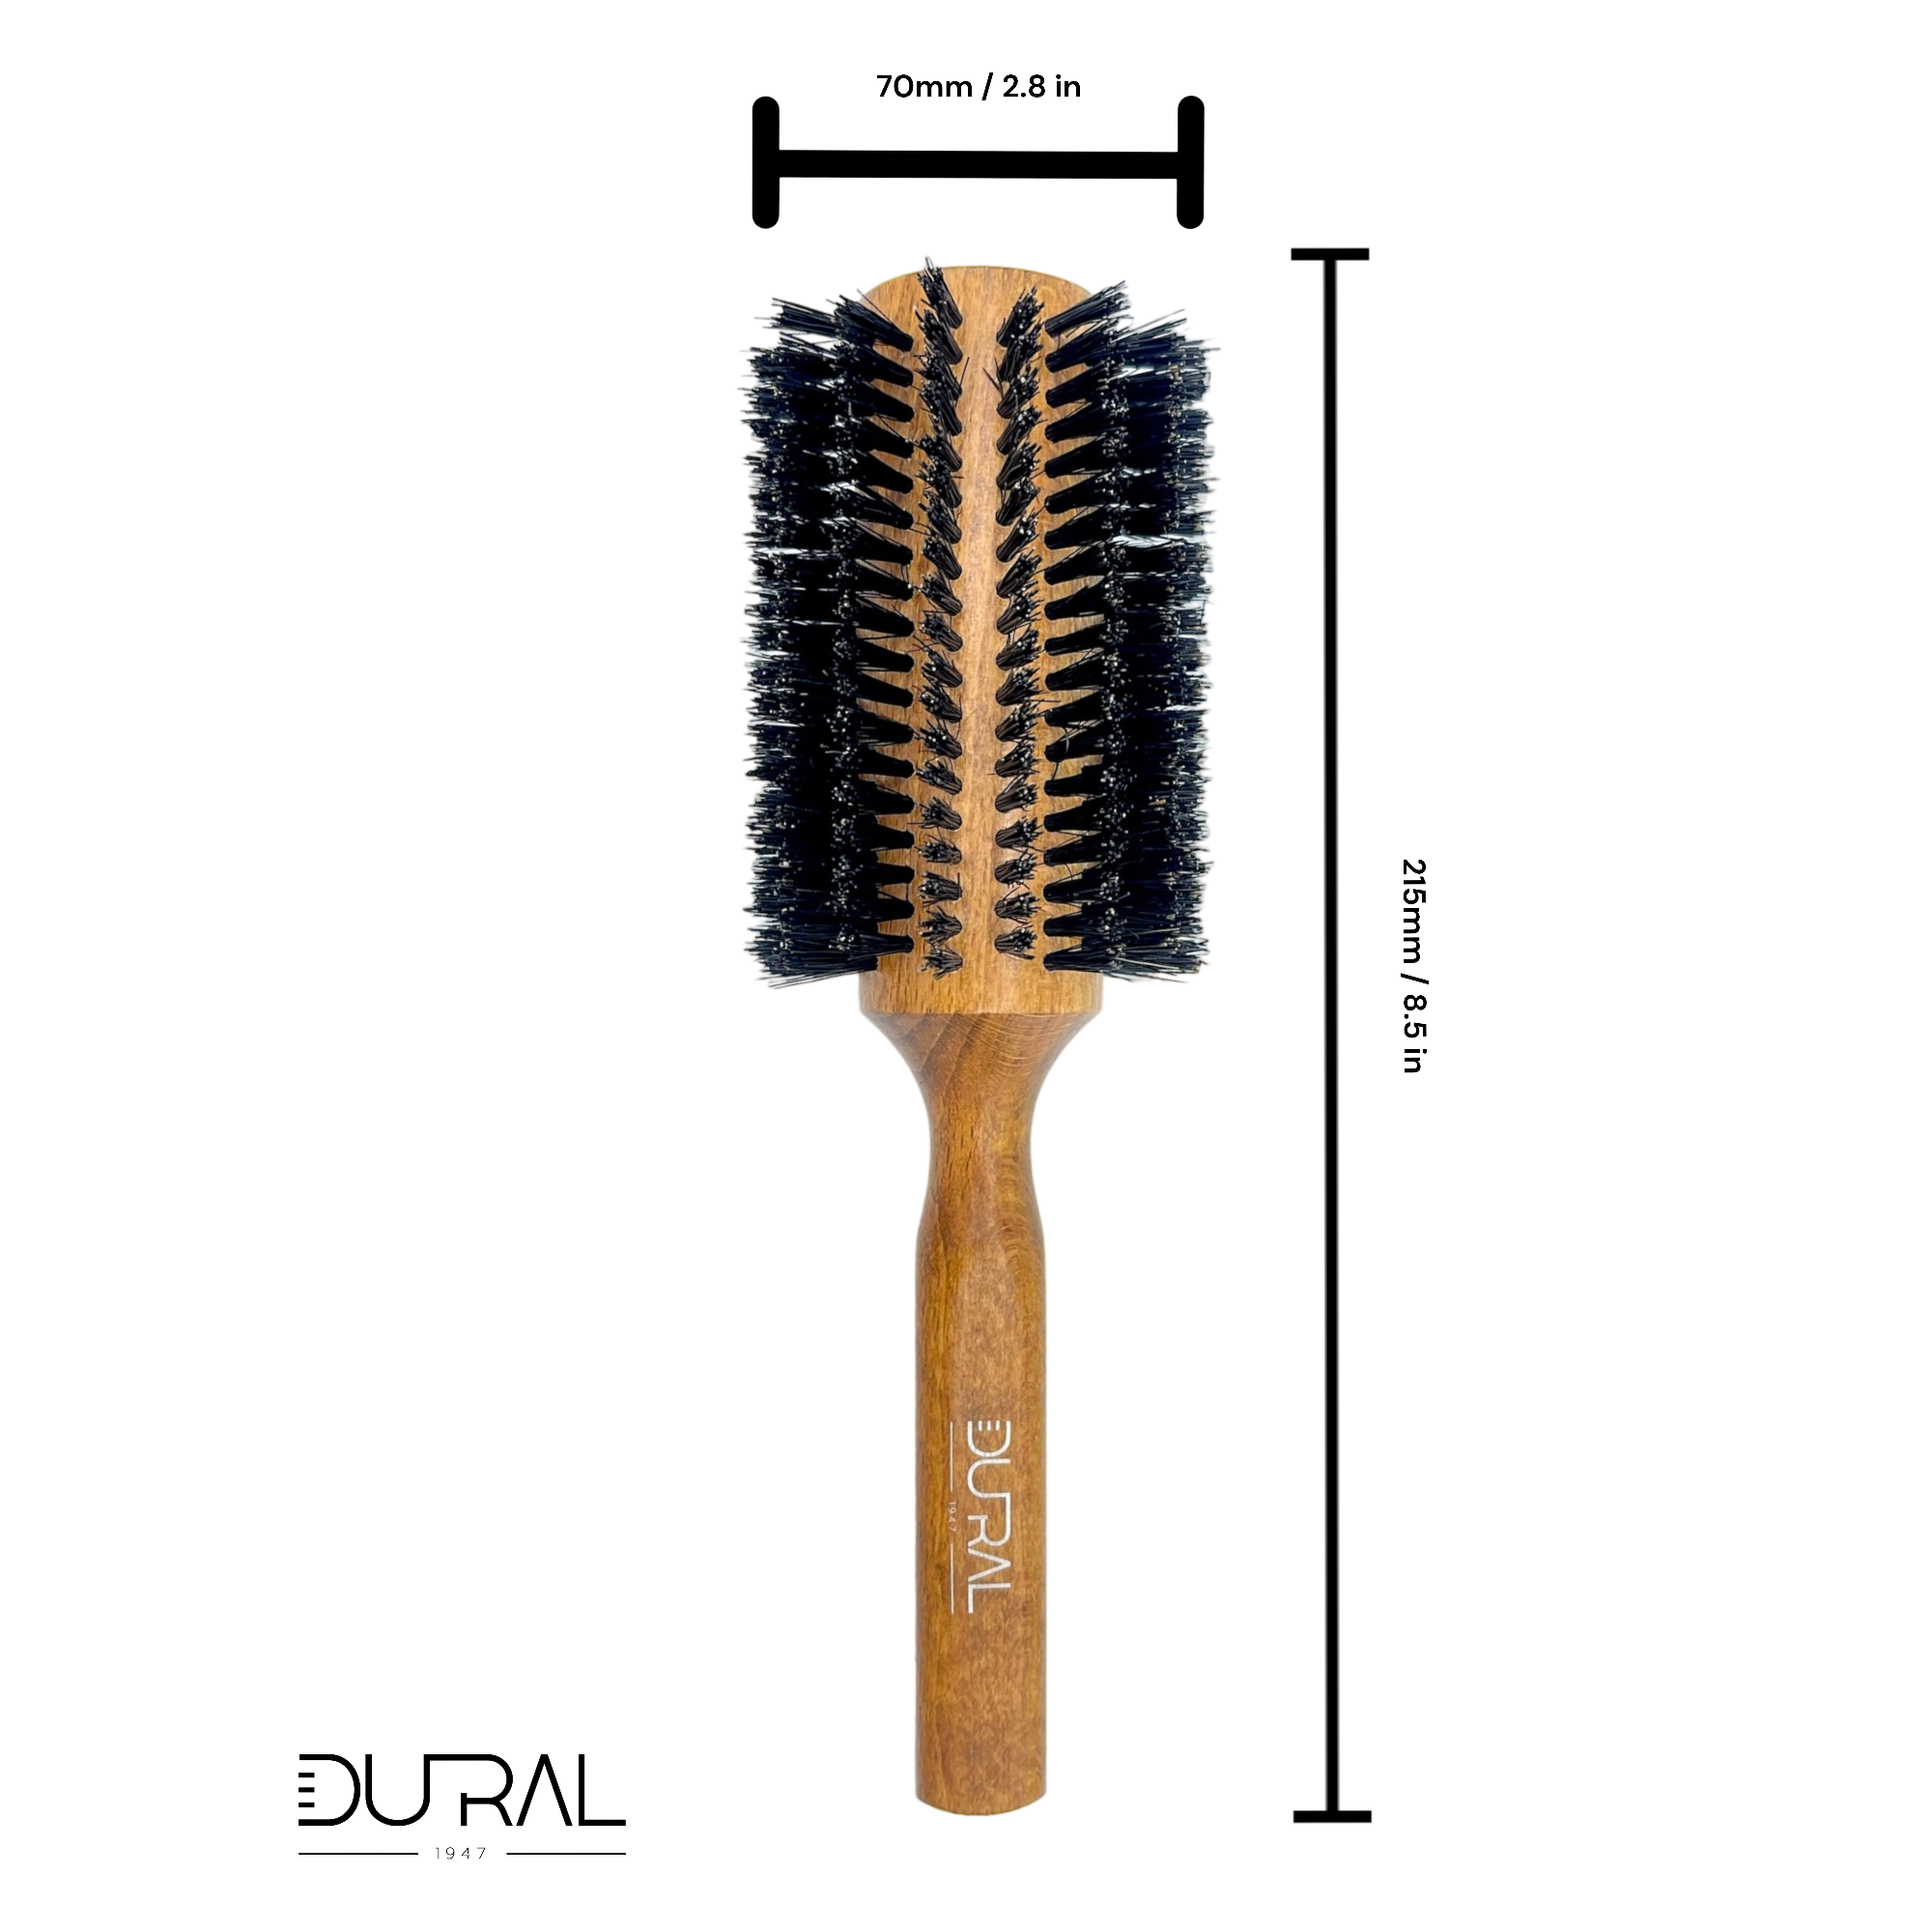 Dural Beech wood round-styler hair brush with boar bristles - 16 rows